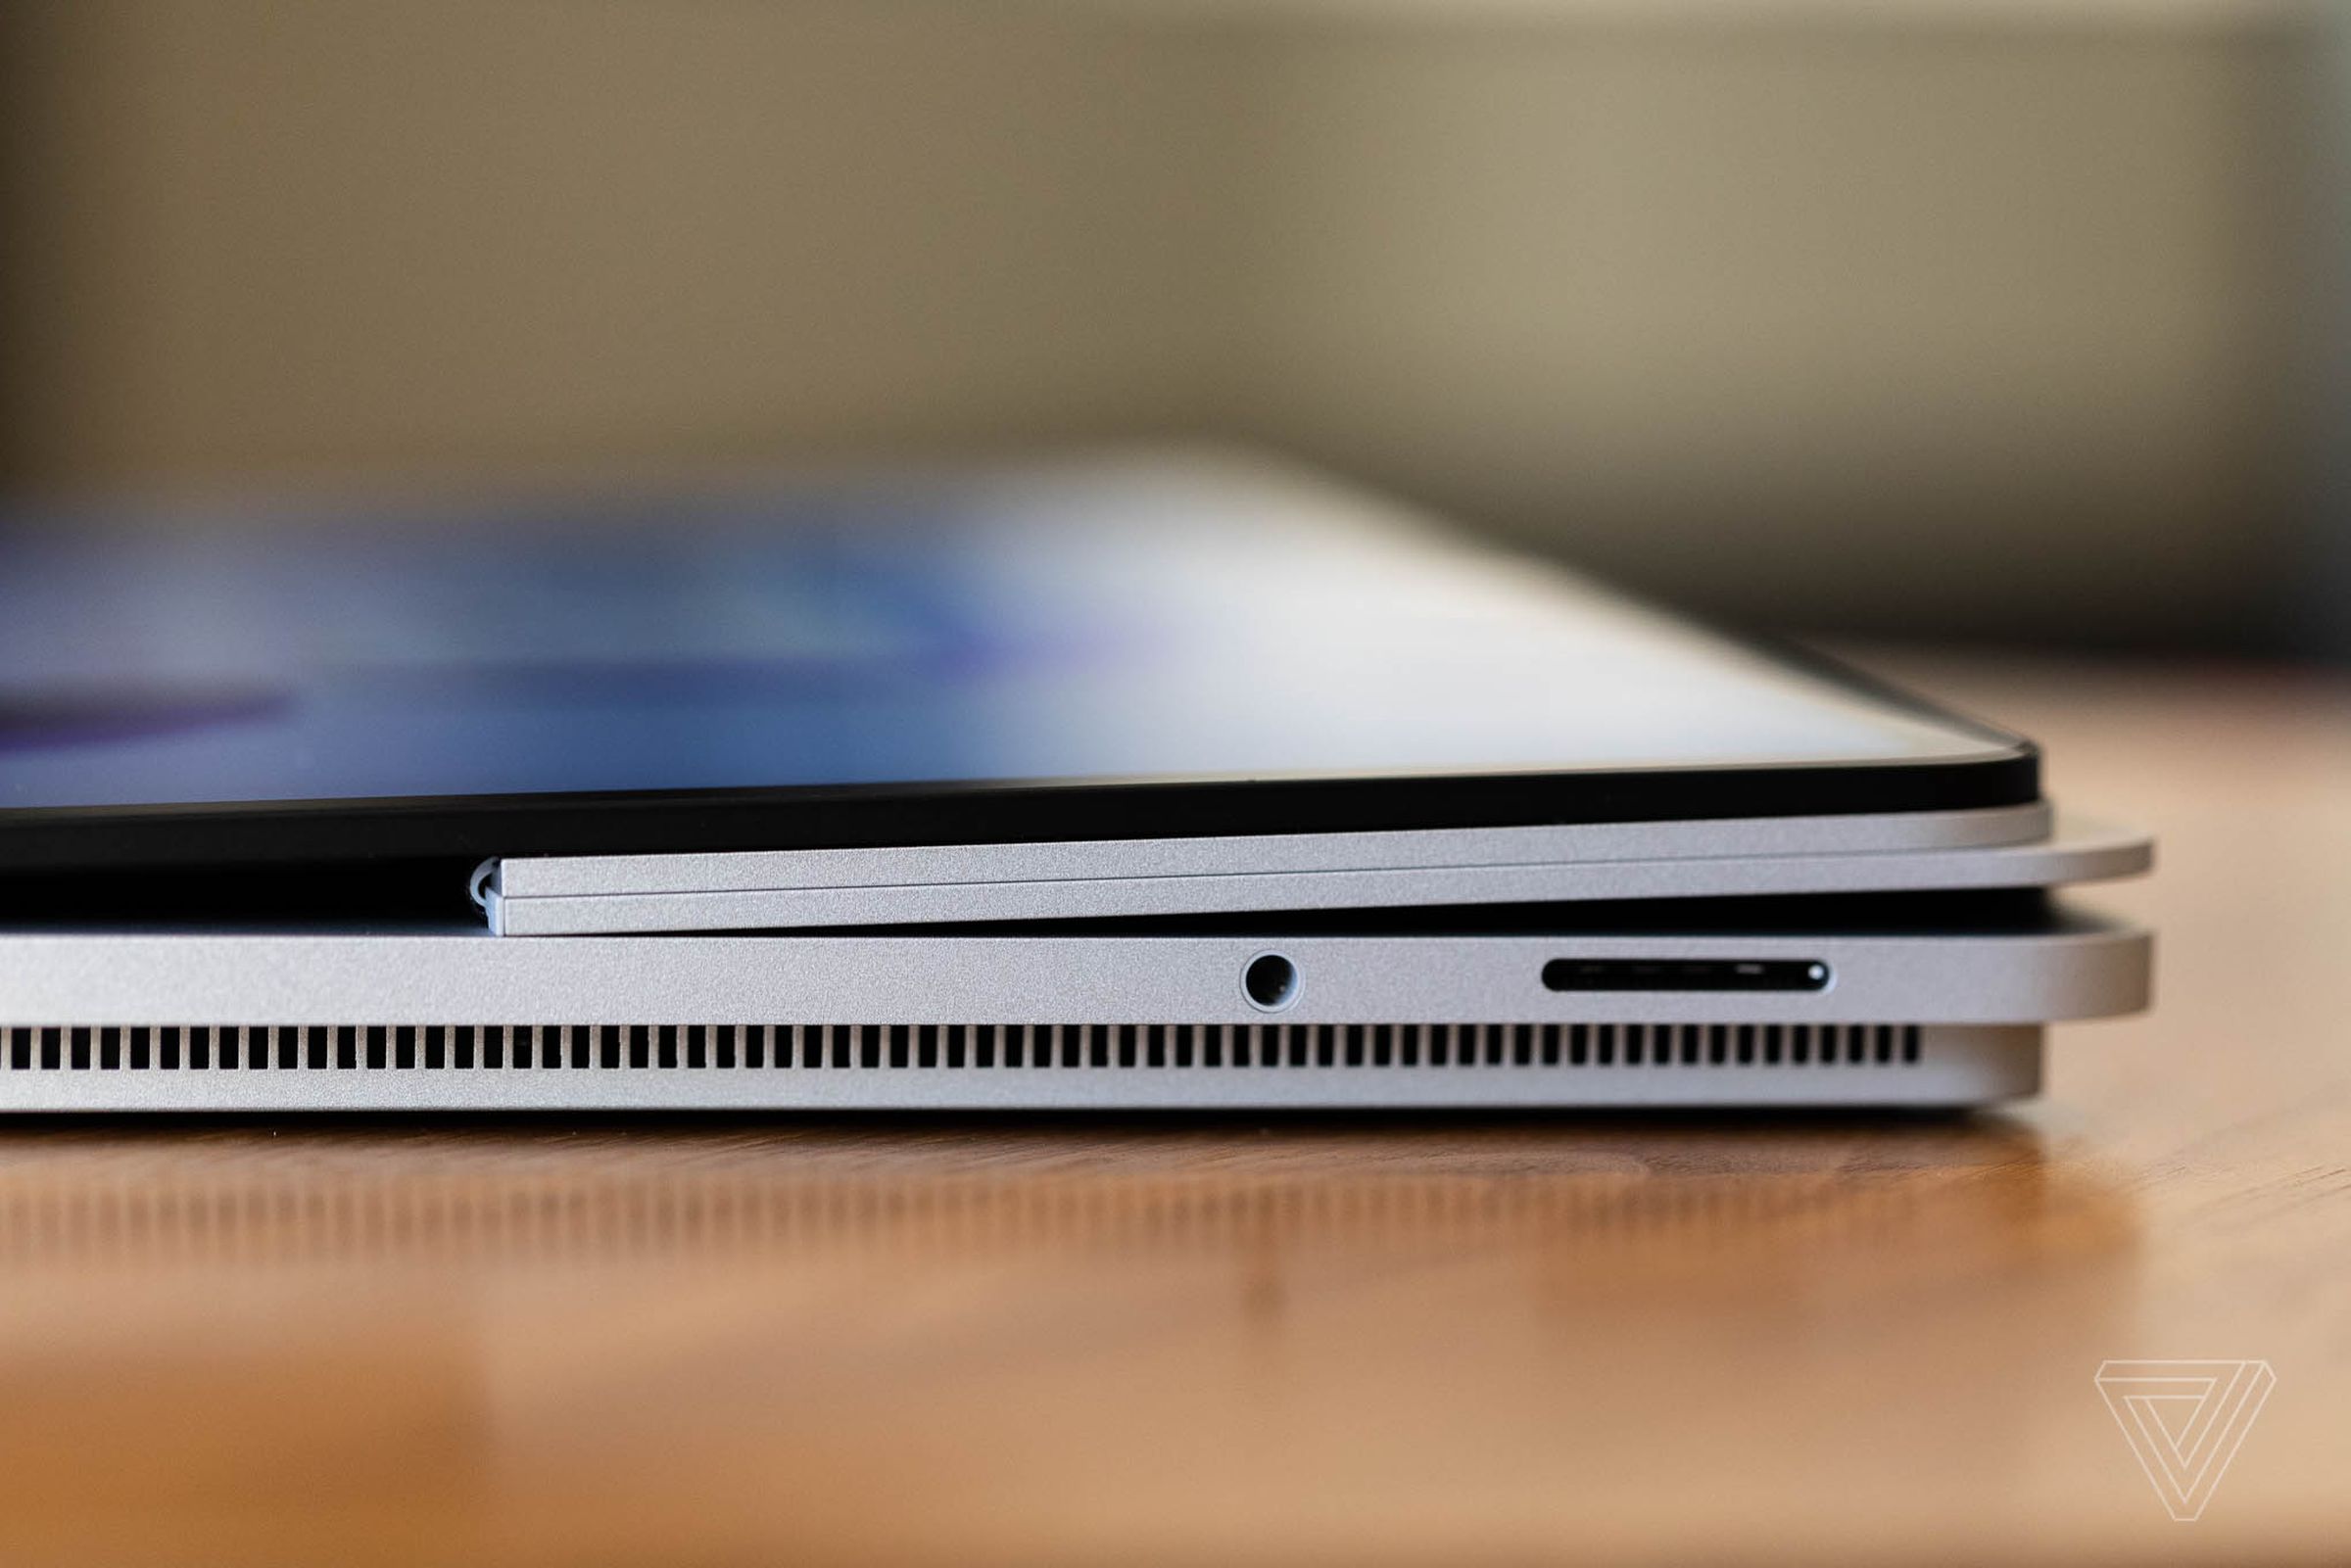 The laptop is thicker than it first appears